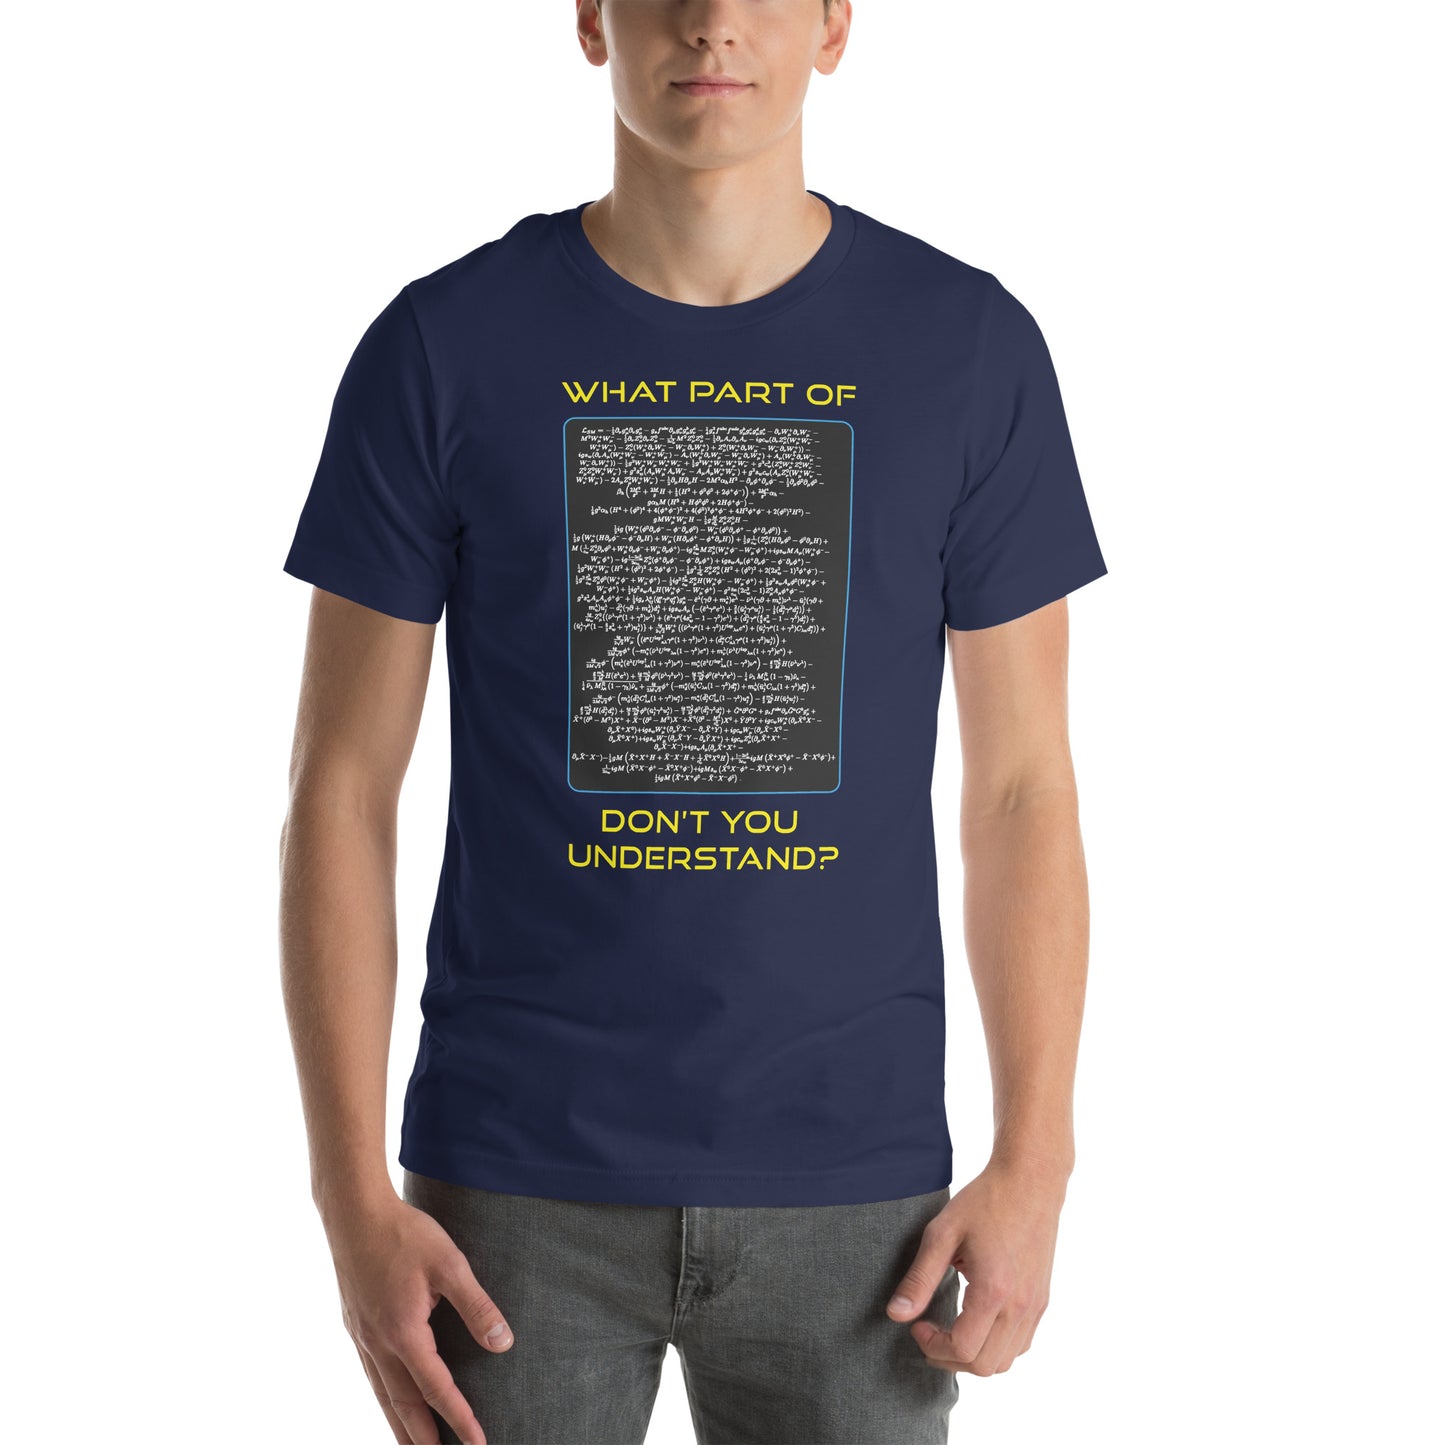 Funny Maths Joke T-Shirt featuring the phrase "What Part of (Standard-Model-Lagrangian Complex Maths) Do You Not Understand?" from the Teqneon HA HA LAND collection. Perfect for math enthusiasts and those who enjoy geeky humour. 